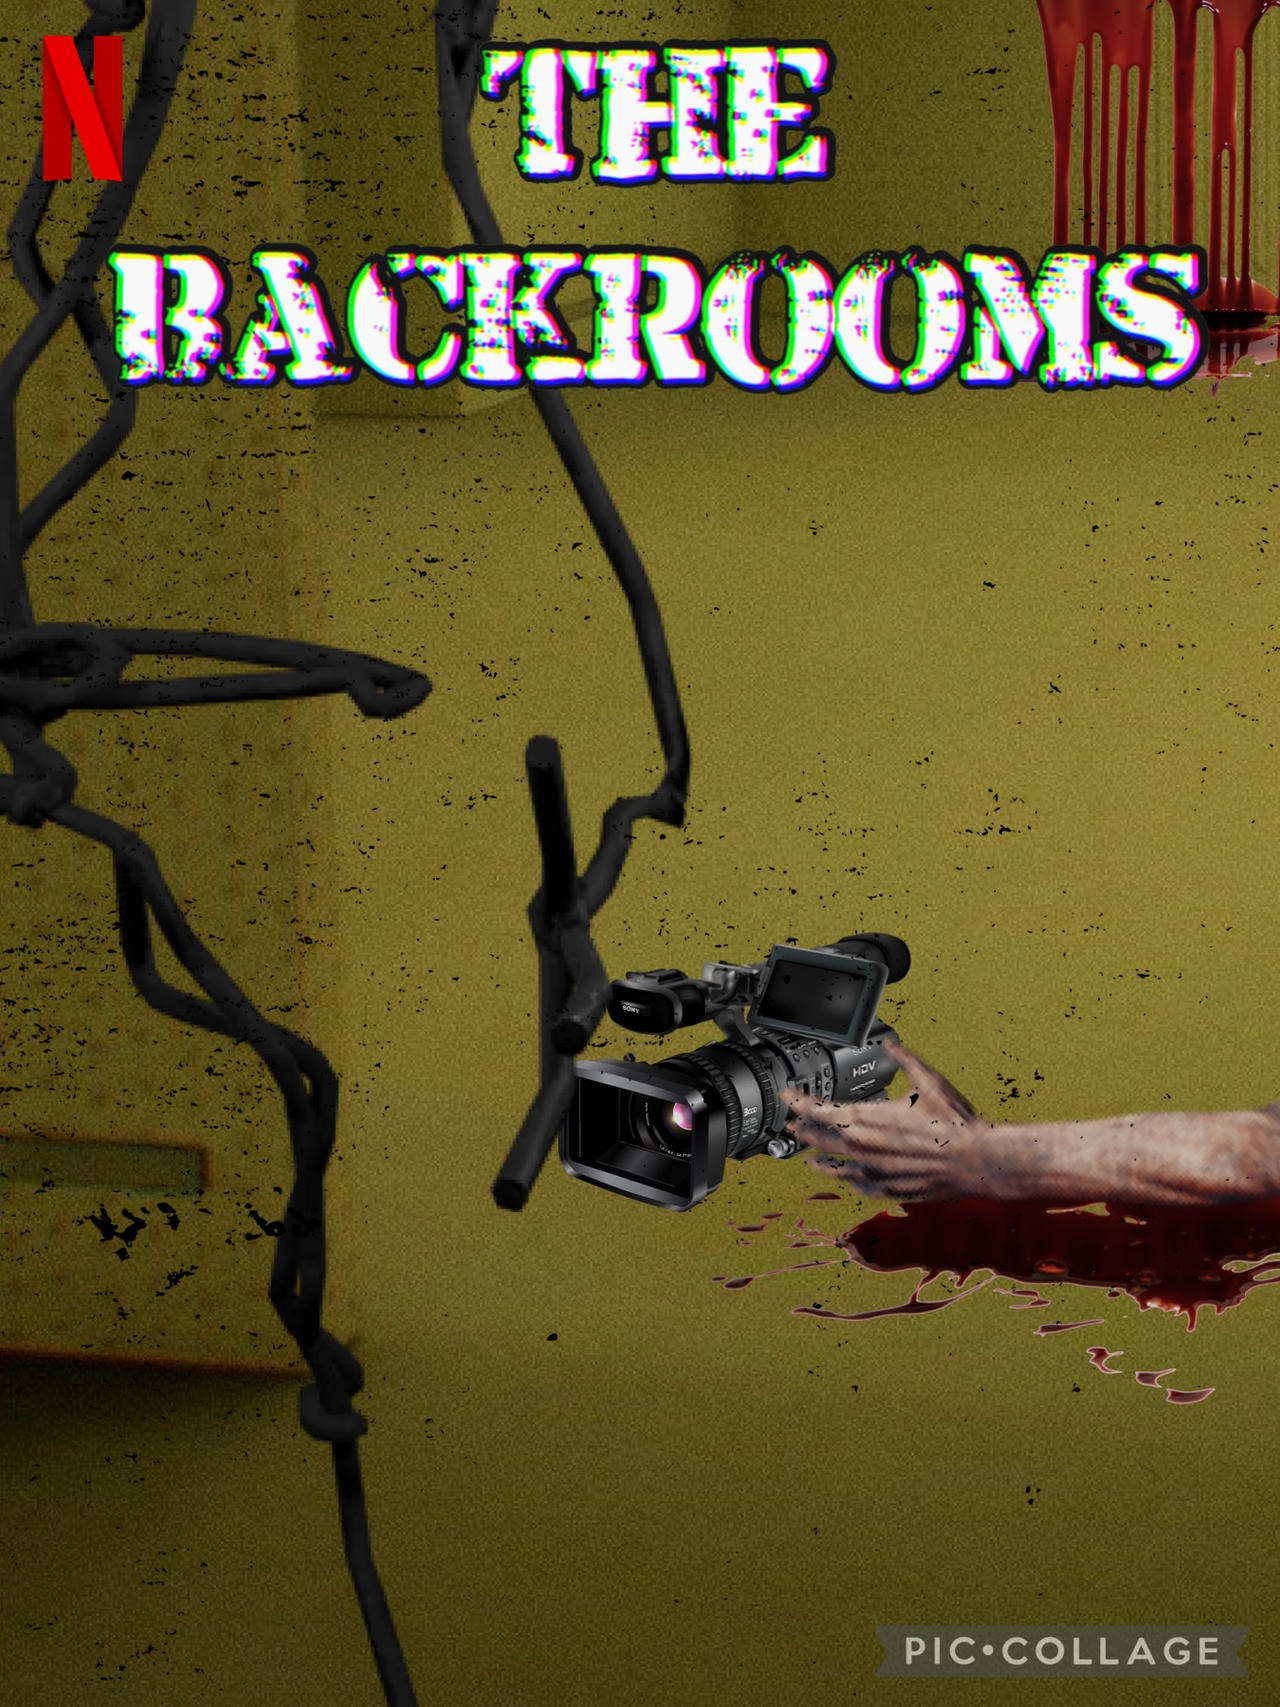 The Backrooms - Concept Movie Poster by BenRothrock on DeviantArt